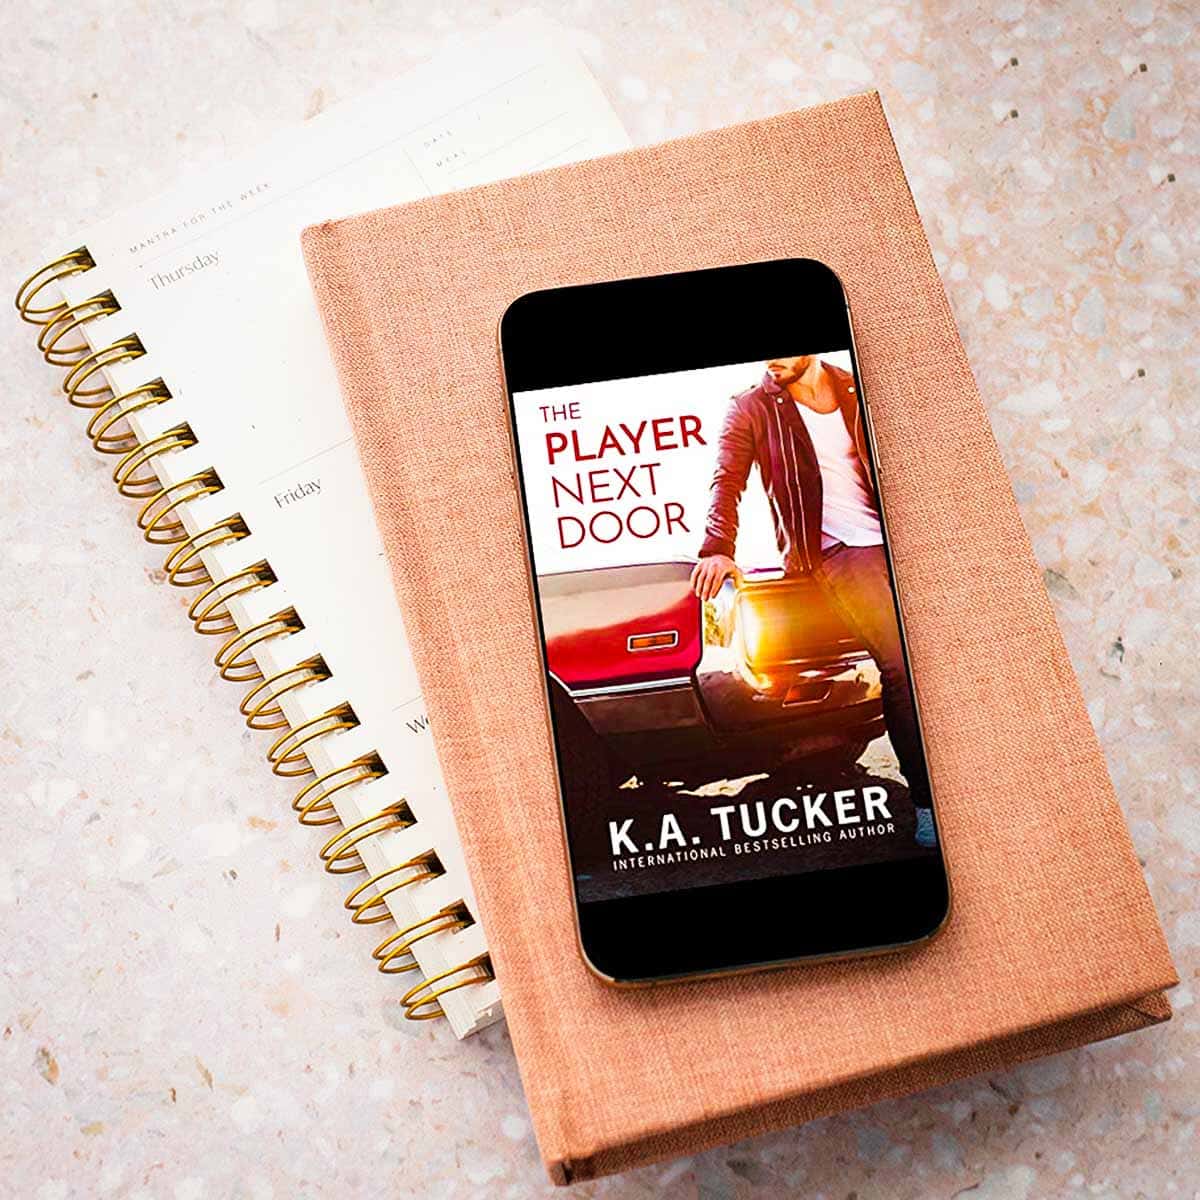 The Player Next Door is a sweet and fun second-chance romance set in a small town–add a hot single dad, an unfiltered best friend, a nice amount of angst, and you have a fabulous summer read!